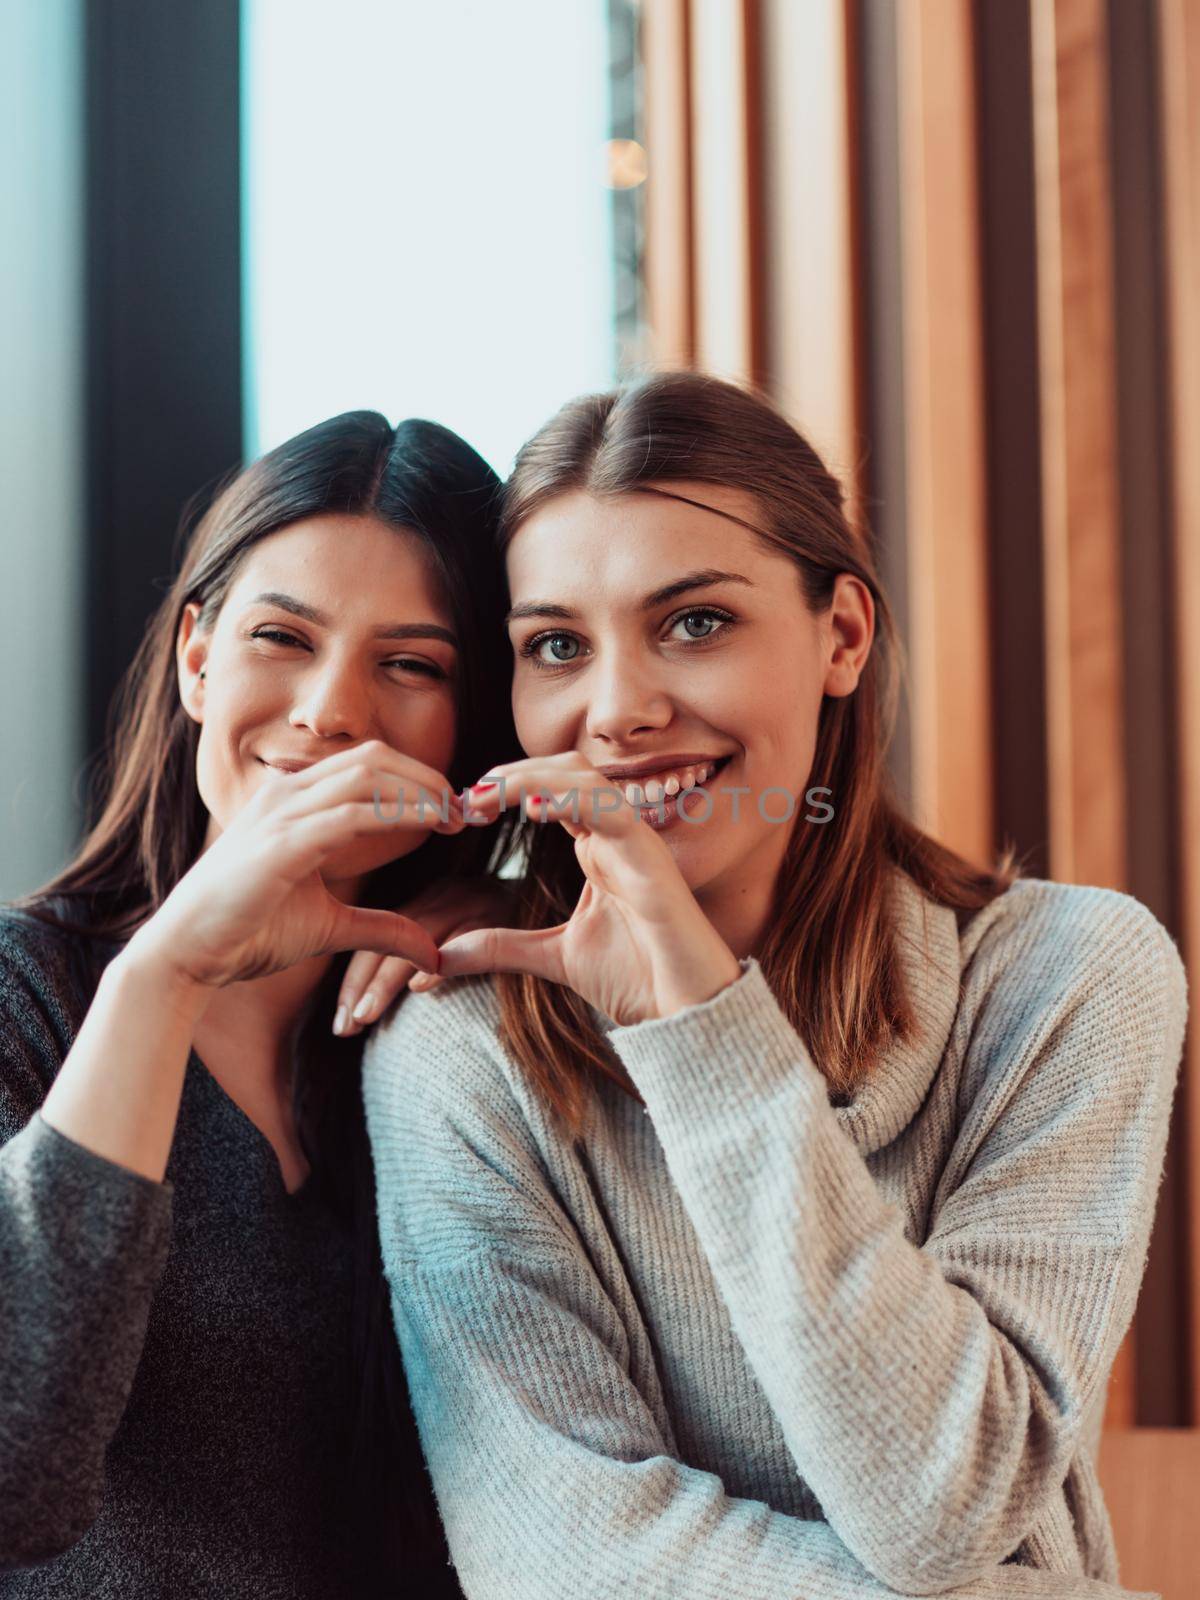 Diverse girls lesbian couple hugging looking at camera and showing heart symbol of love, close up portrait. Stylish cool generation z women dating in love enjoy romantic relationships. Lgbtq concept. 